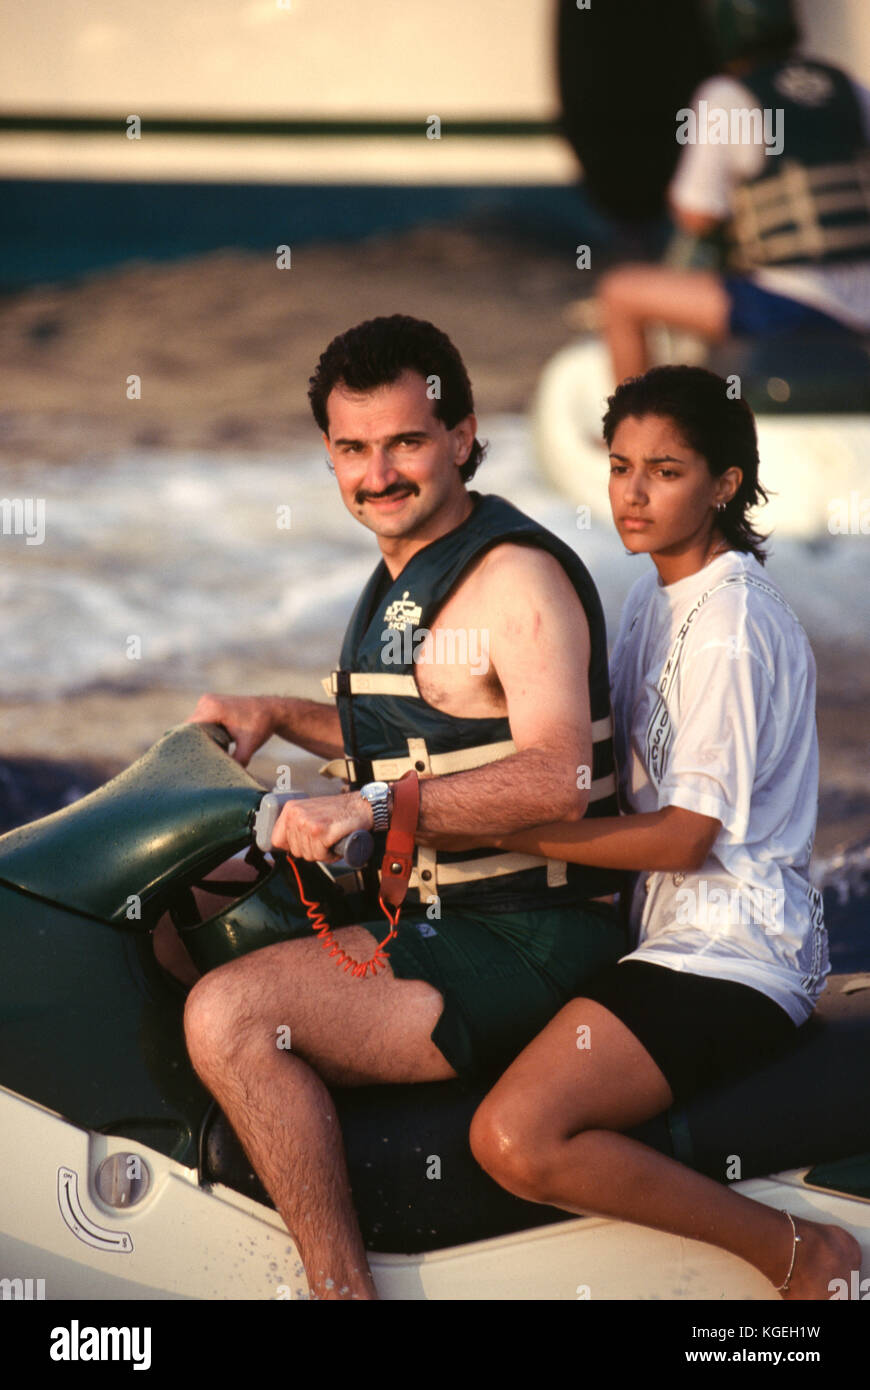 Saudi prince Al-Waleed Bin Talal bin Abdulaziz al Saud, businessman, investor and philanthropist, and member of the Saudi royal family, on summer holiday with children on board his "Kingdom 5KR" 85-meter yacht, bought "Trump Princess" from Donald Trump in the 1980s during his financial problems, who had in turn bought "Nabila"  from Saudi arms dealer Khashoggi, during which time it appeared as the Flying Saucer in James Bond's "Never Say Never Again", in Nice, France in 1997.  Al-Waleed was arrested November 4th, 2017 in an anti-corruption drive that included at least 10 other princes, four mi Stock Photo